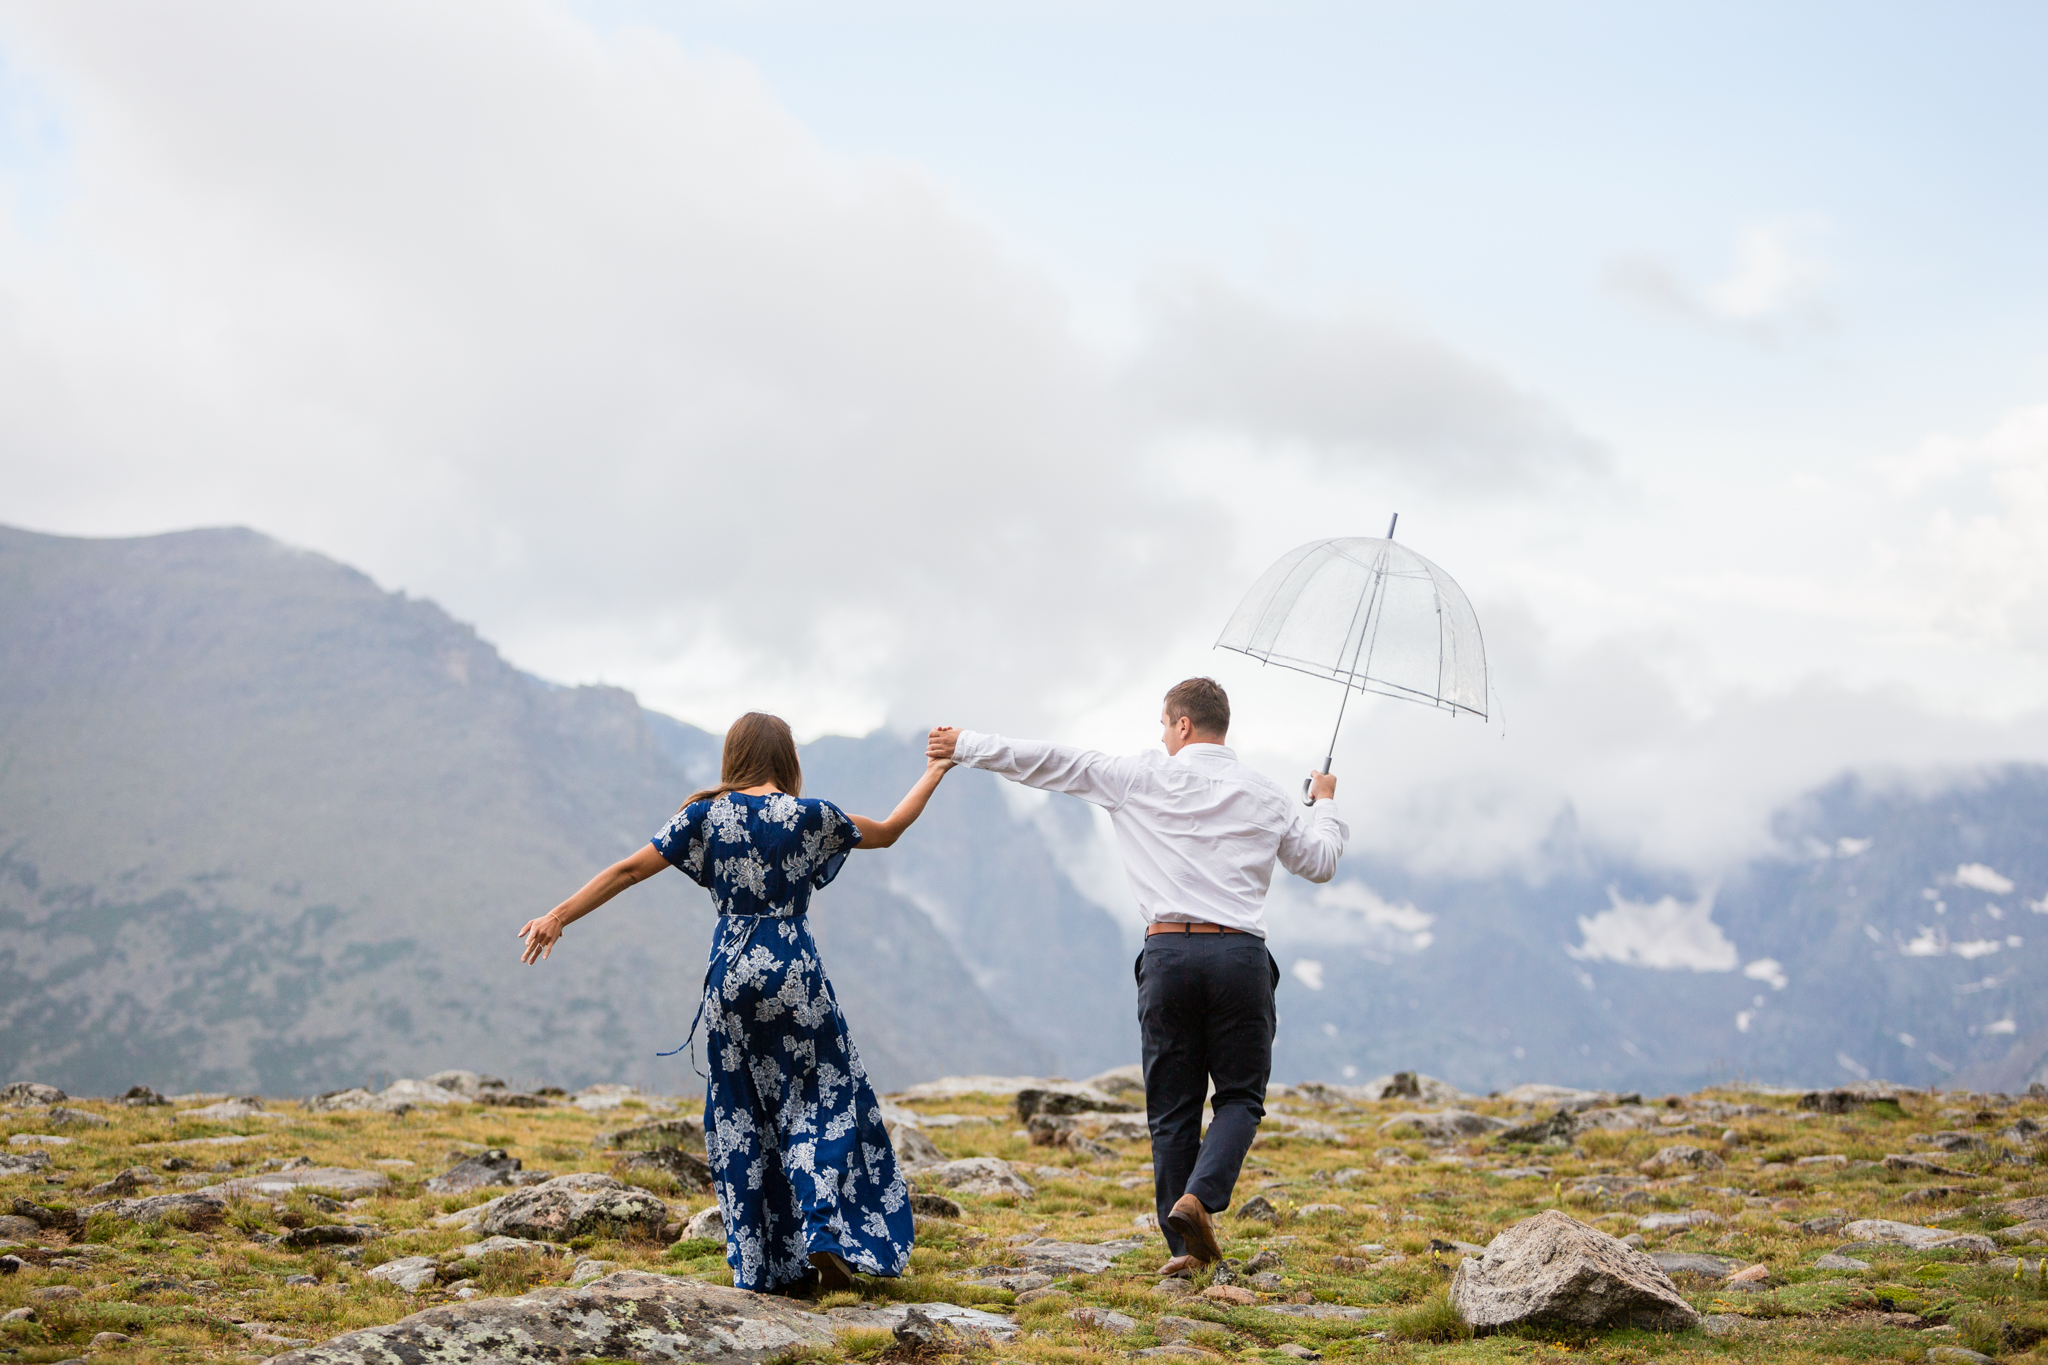 rmnp trail ridge road engagement photos candid epic photos by colorado engagement photographer kathryn kim do we need an engagement session